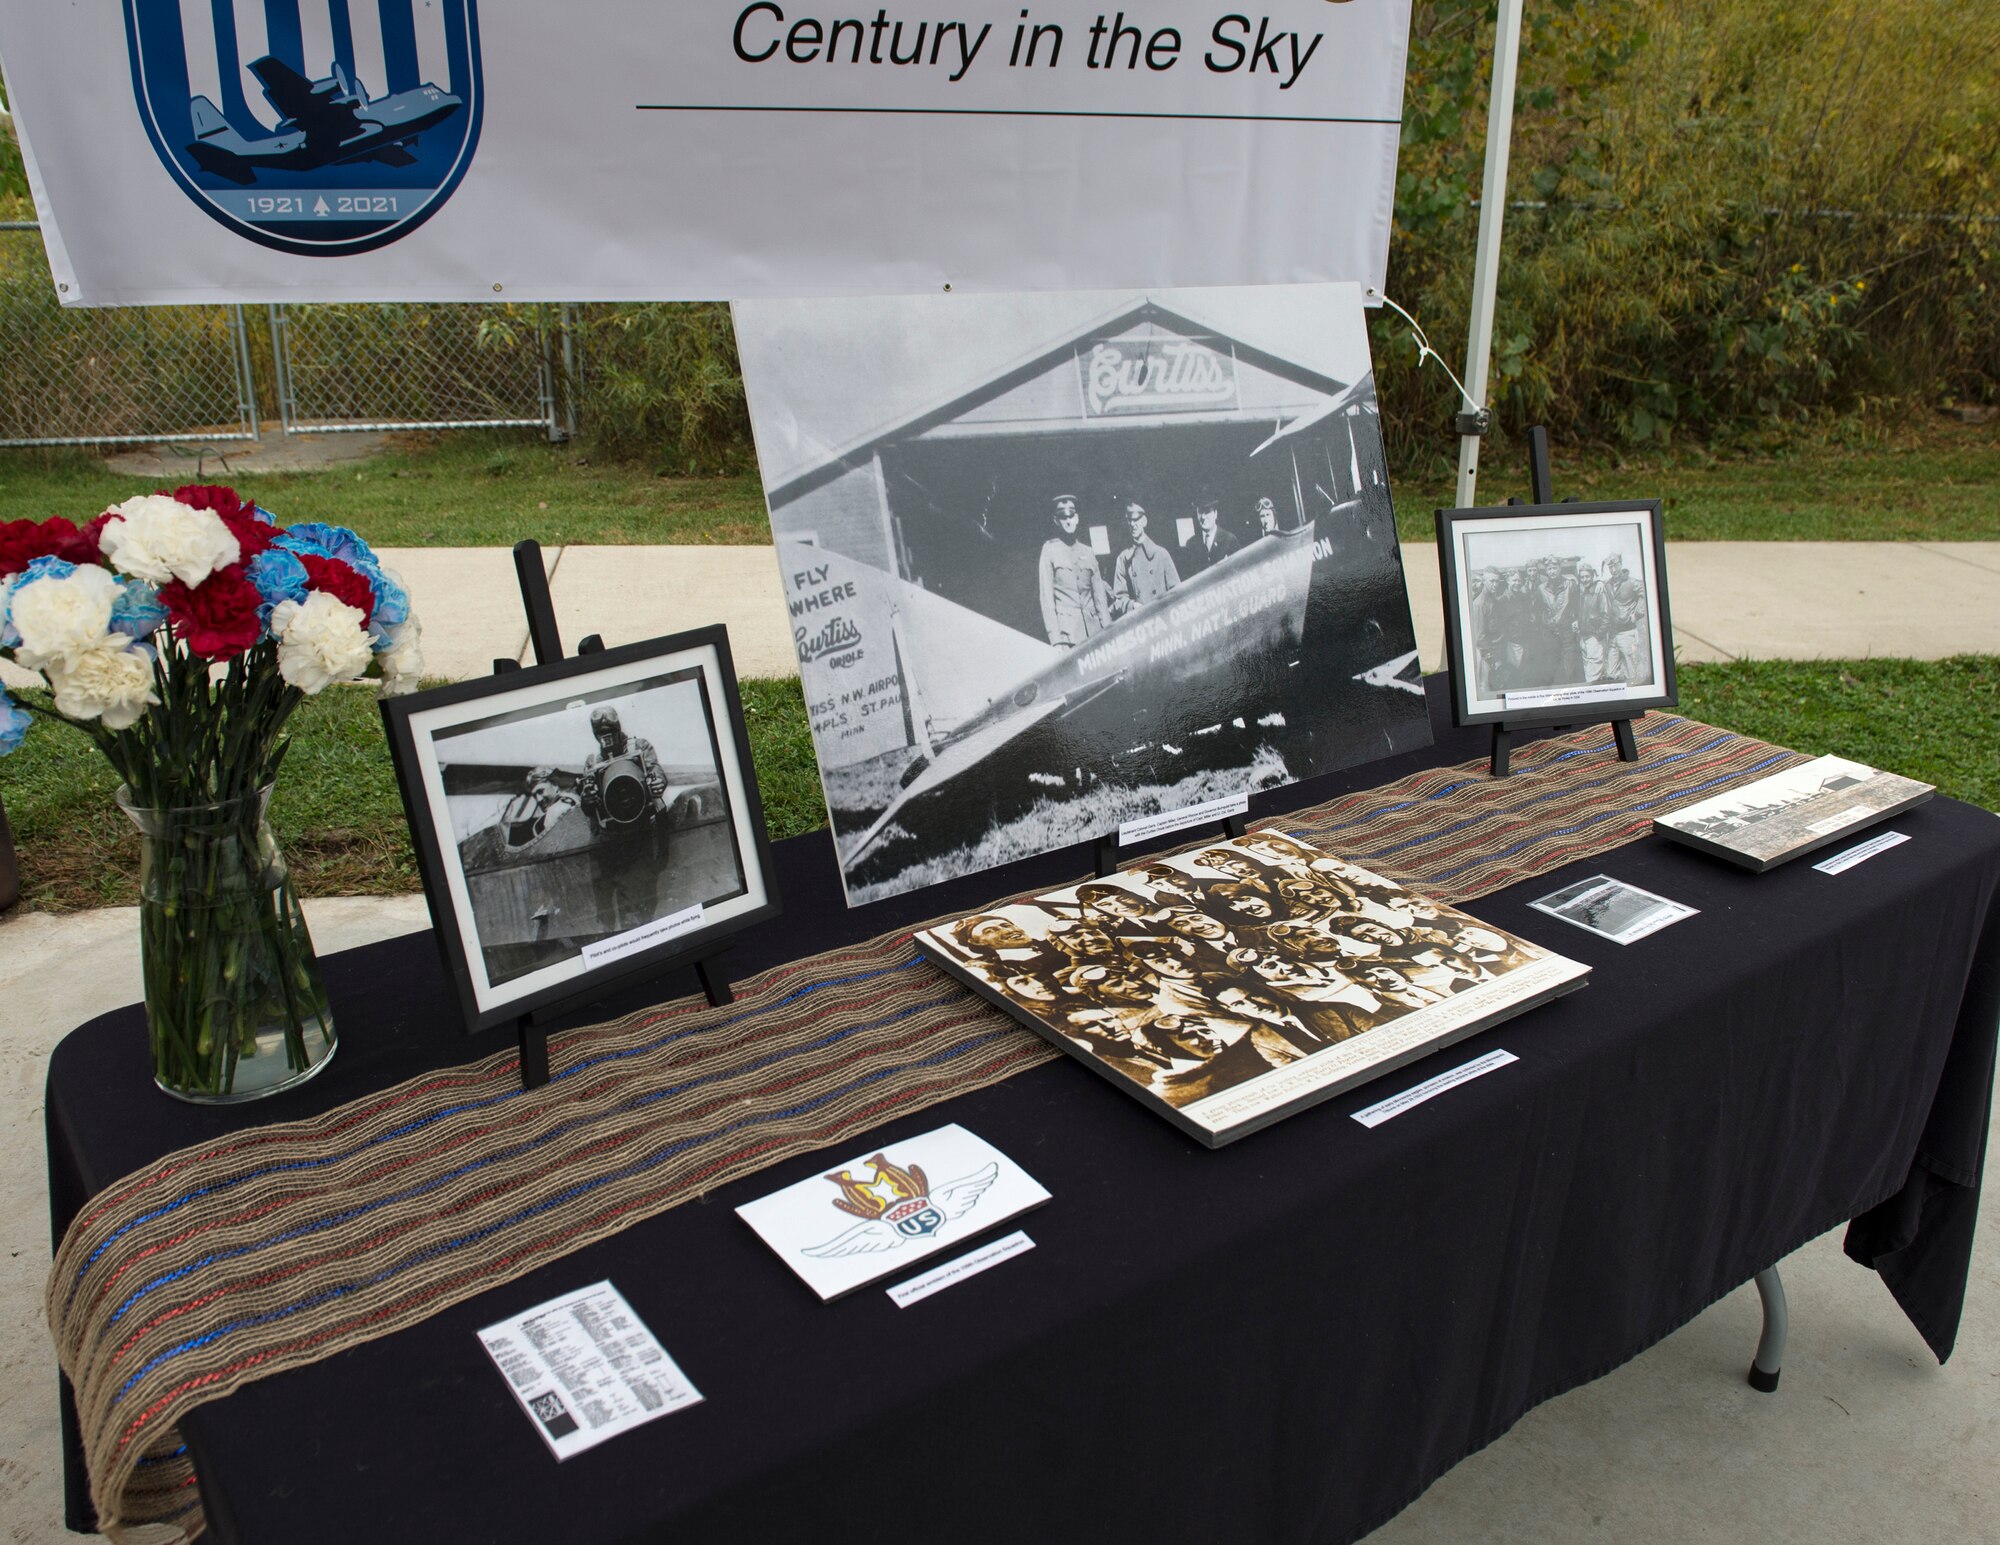 Historical items from the 109th Observation Squadron were placed on display in Falcon Heights, Minn., Sept. 26, 2020.